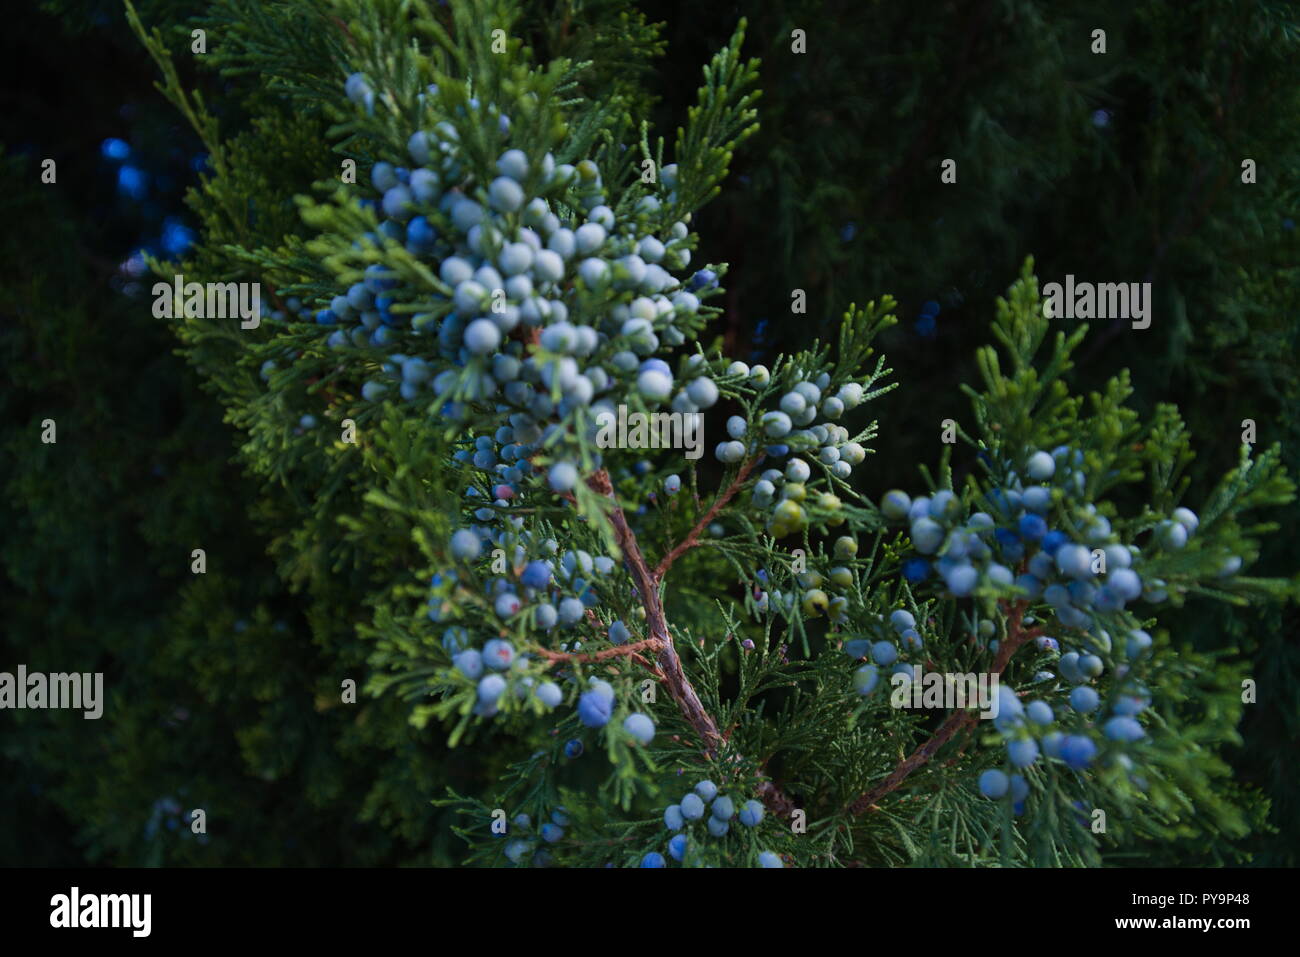 In and out-of-focus juniper branches and blue juniper berries. Gives off a Christmas, holiday vibe. Stock Photo